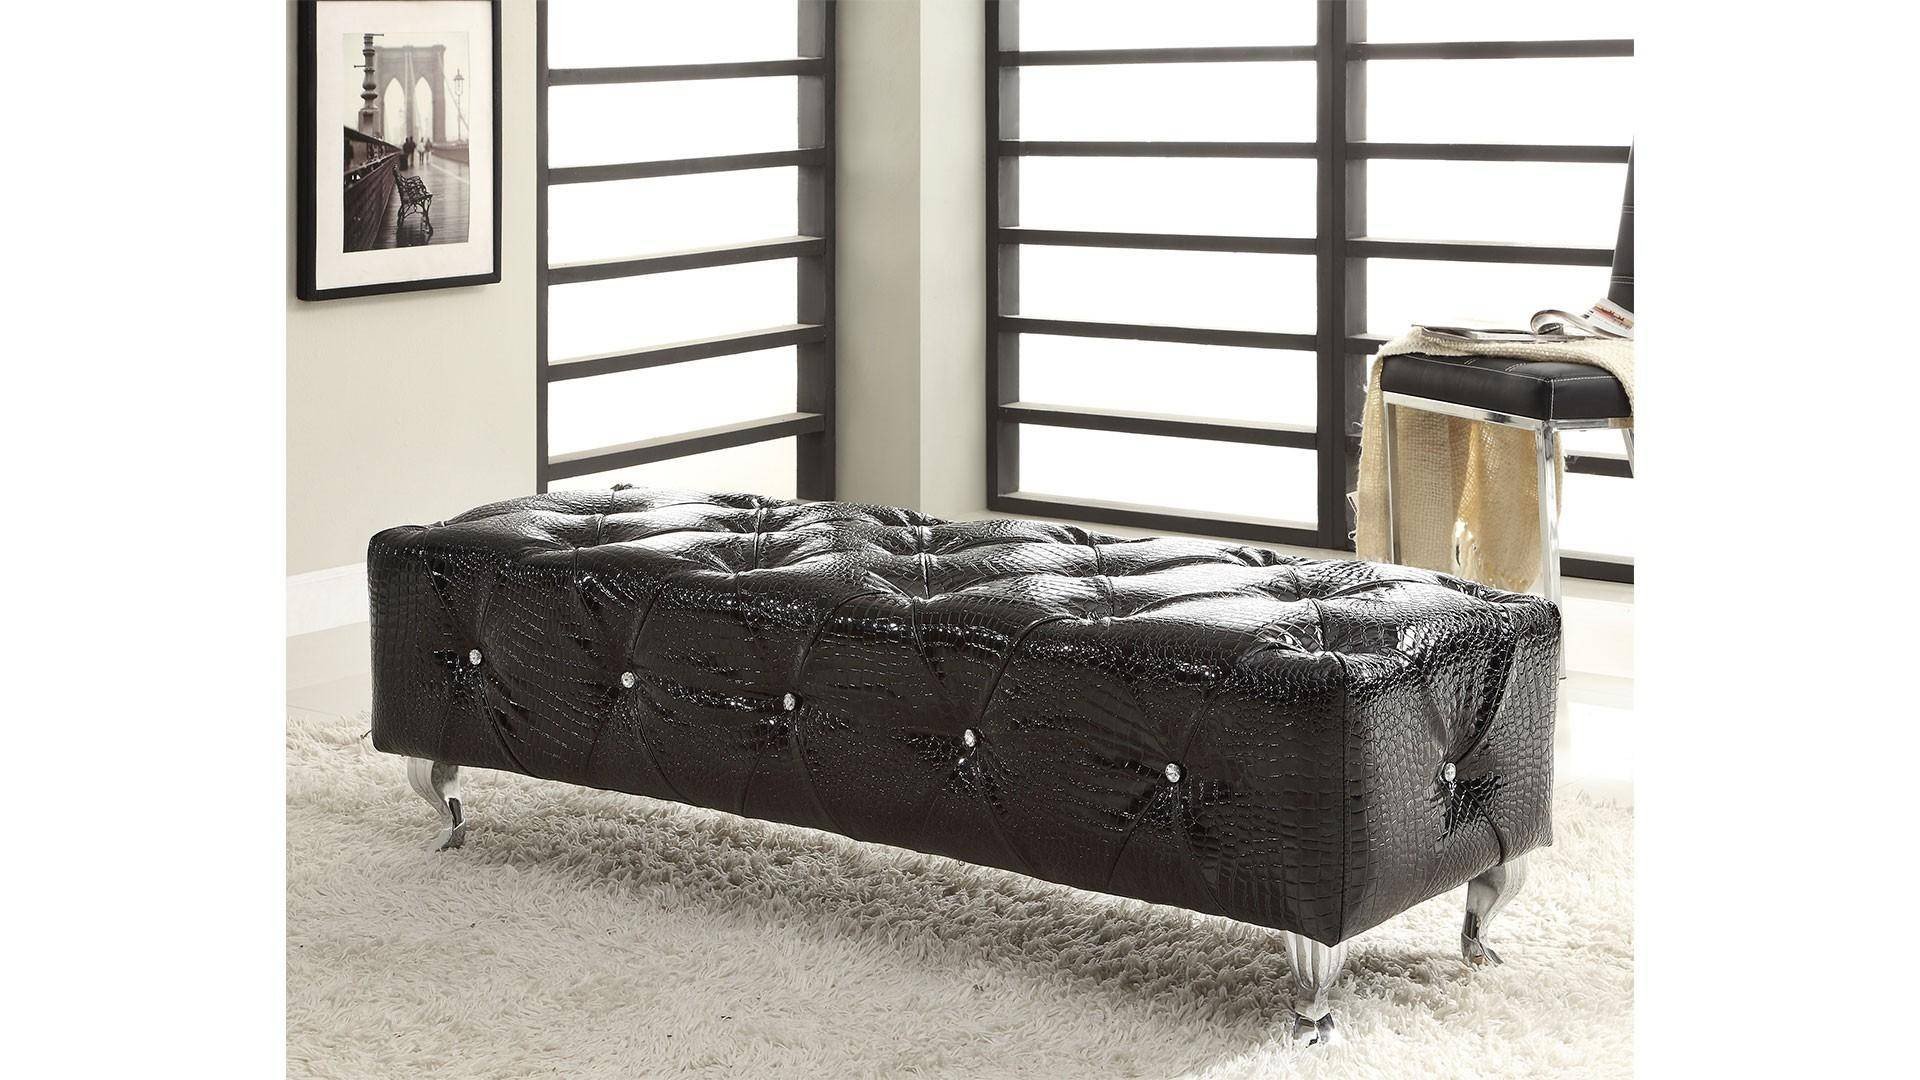 White Lacquer Bedroom Set Luxury at Home Michelle King Platform Bedroom Set 2 Pcs In Black Leather